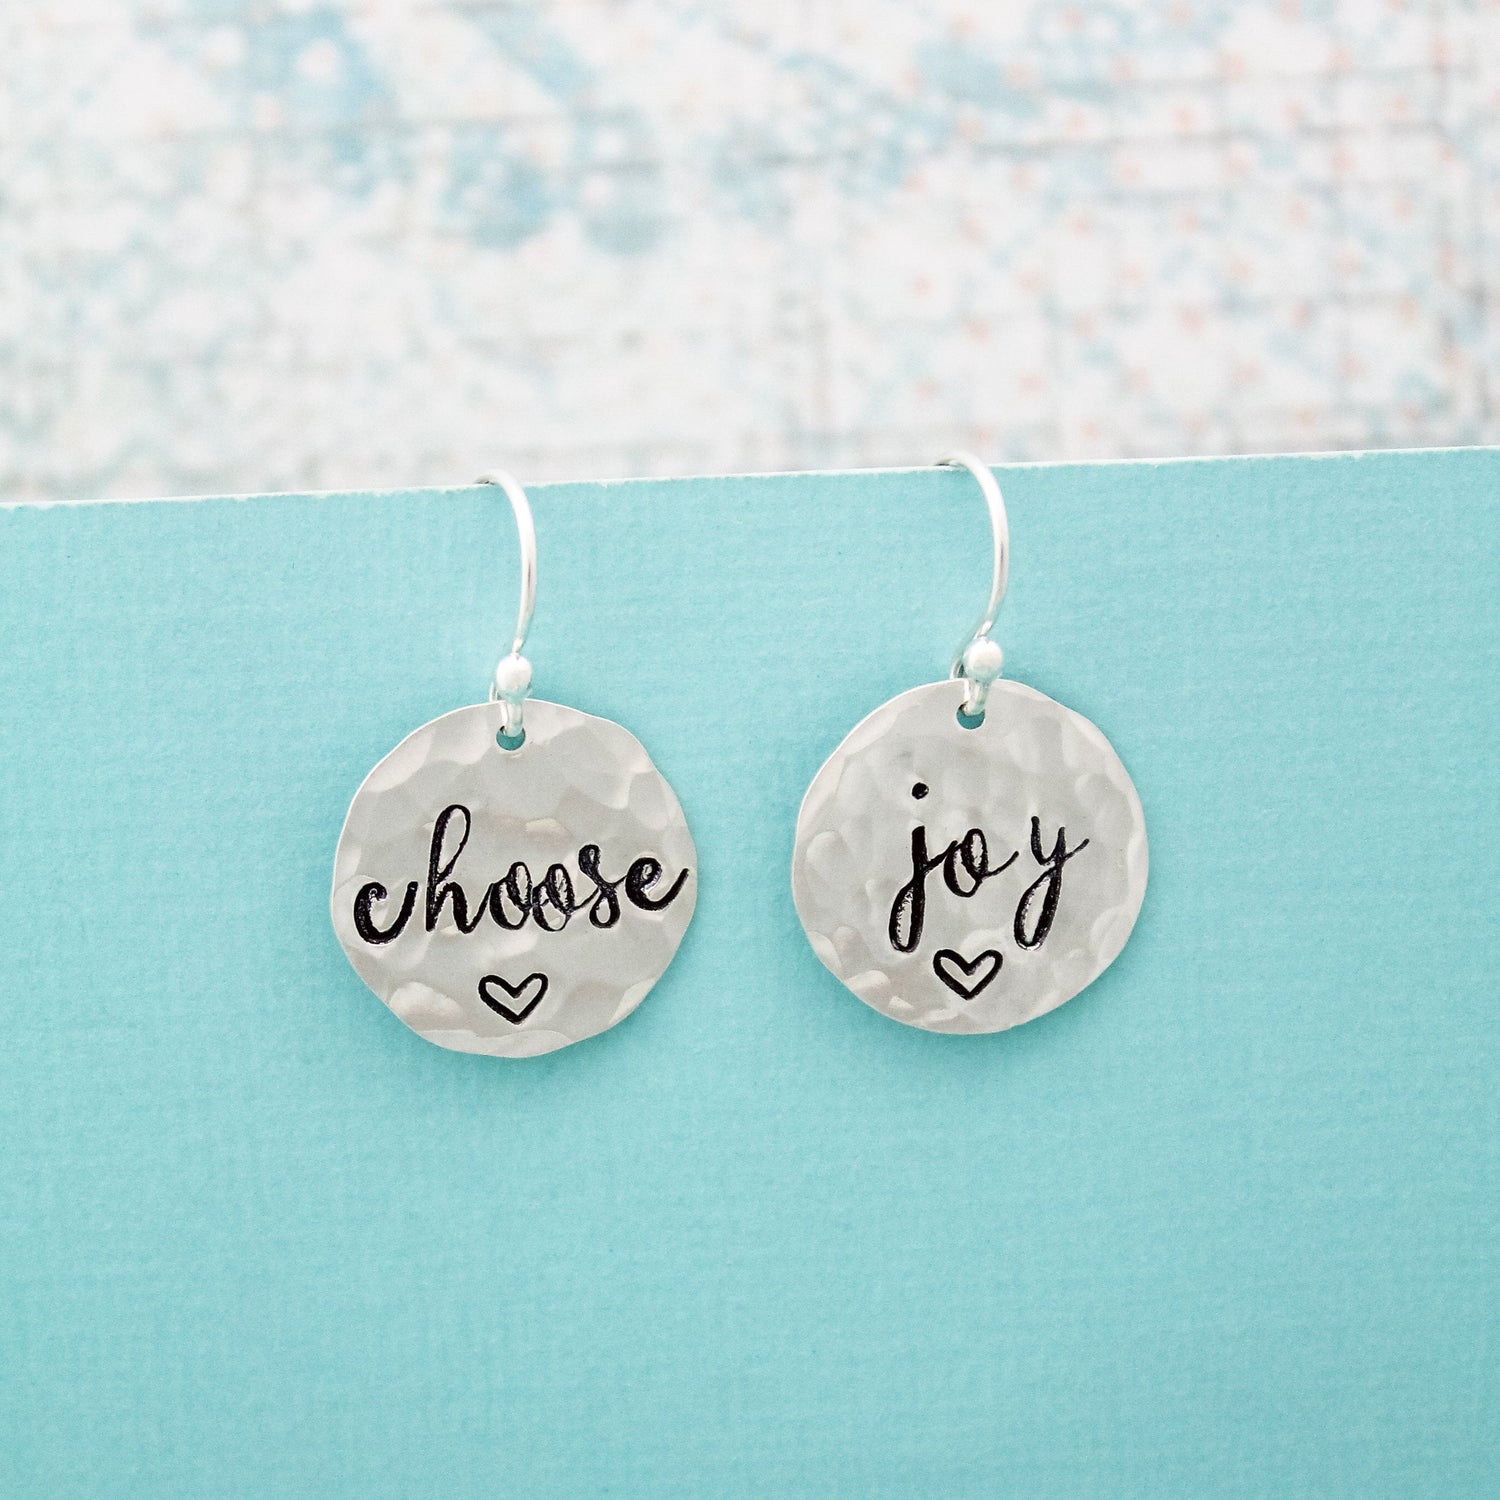 Choose Joy Earrings in Sterling Silver, Positive Inspirational Jewelry, Hand Stamped Earrings, Gifts for Her, Choose Joy Jewelry